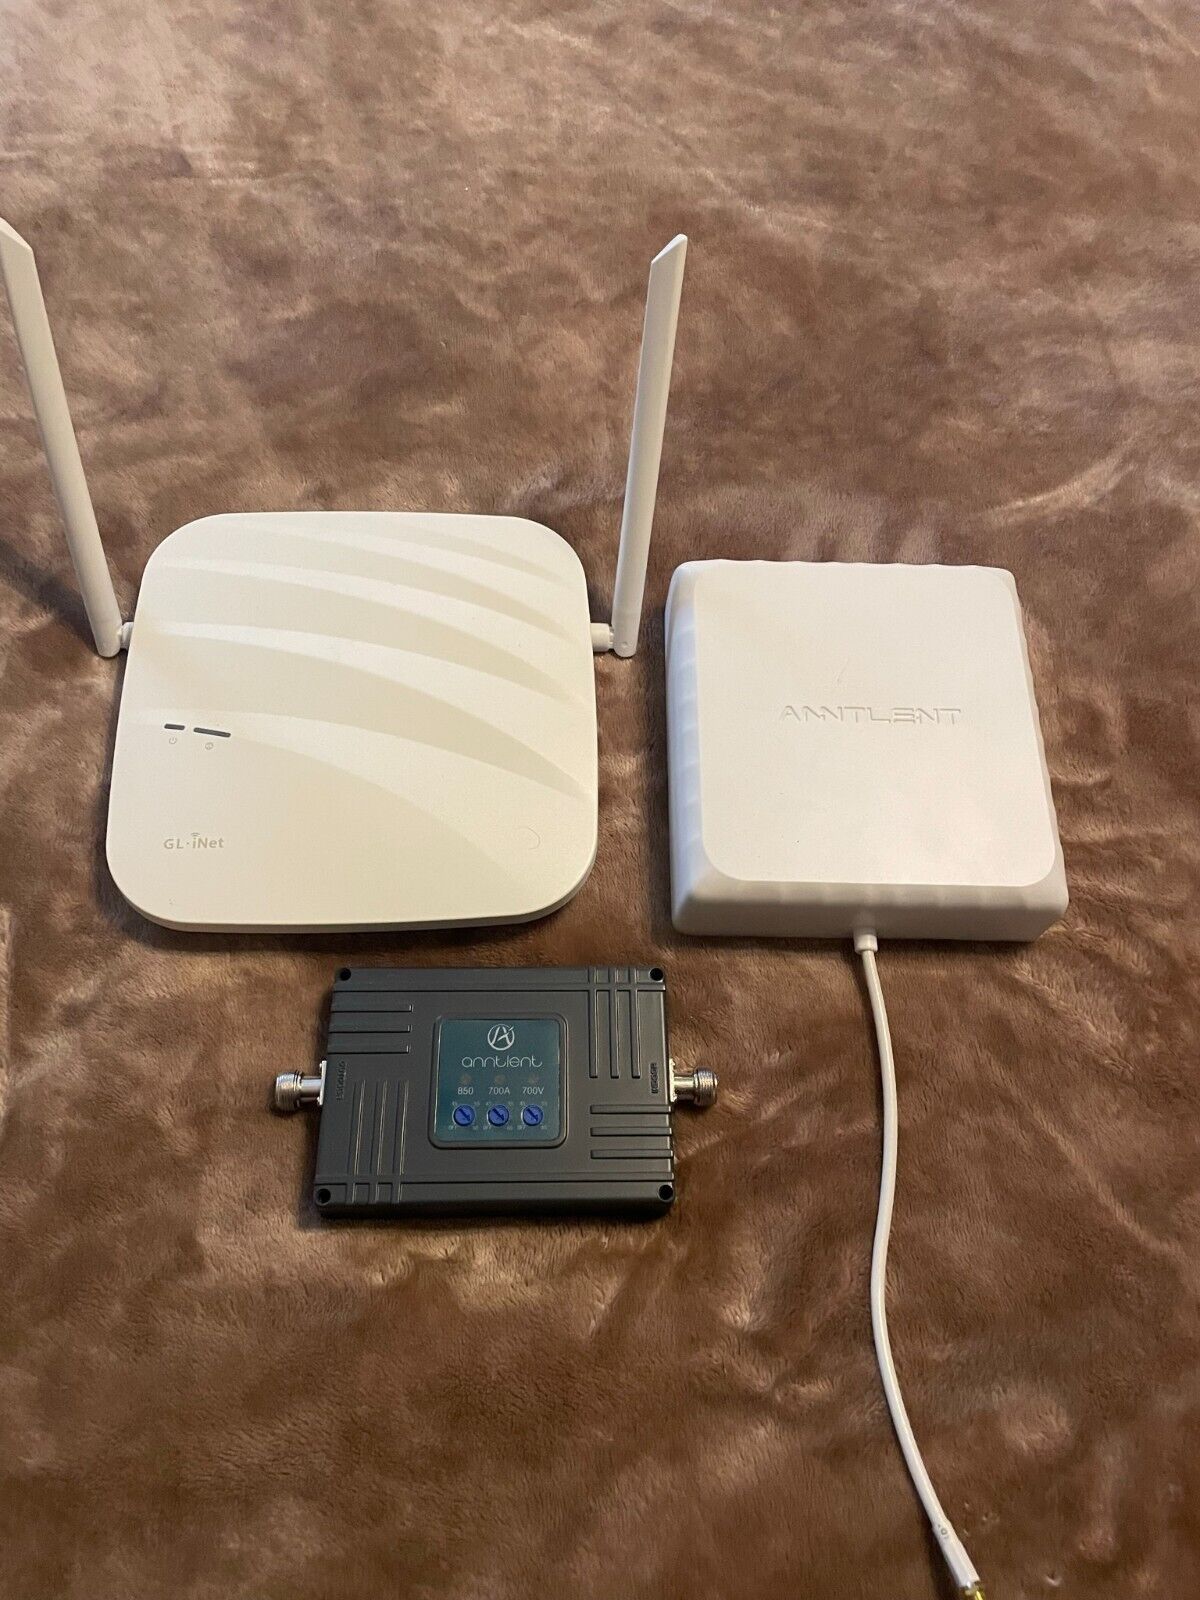 Cellular Router with Modem and Cell Signal Boaster. All cables and power cords.